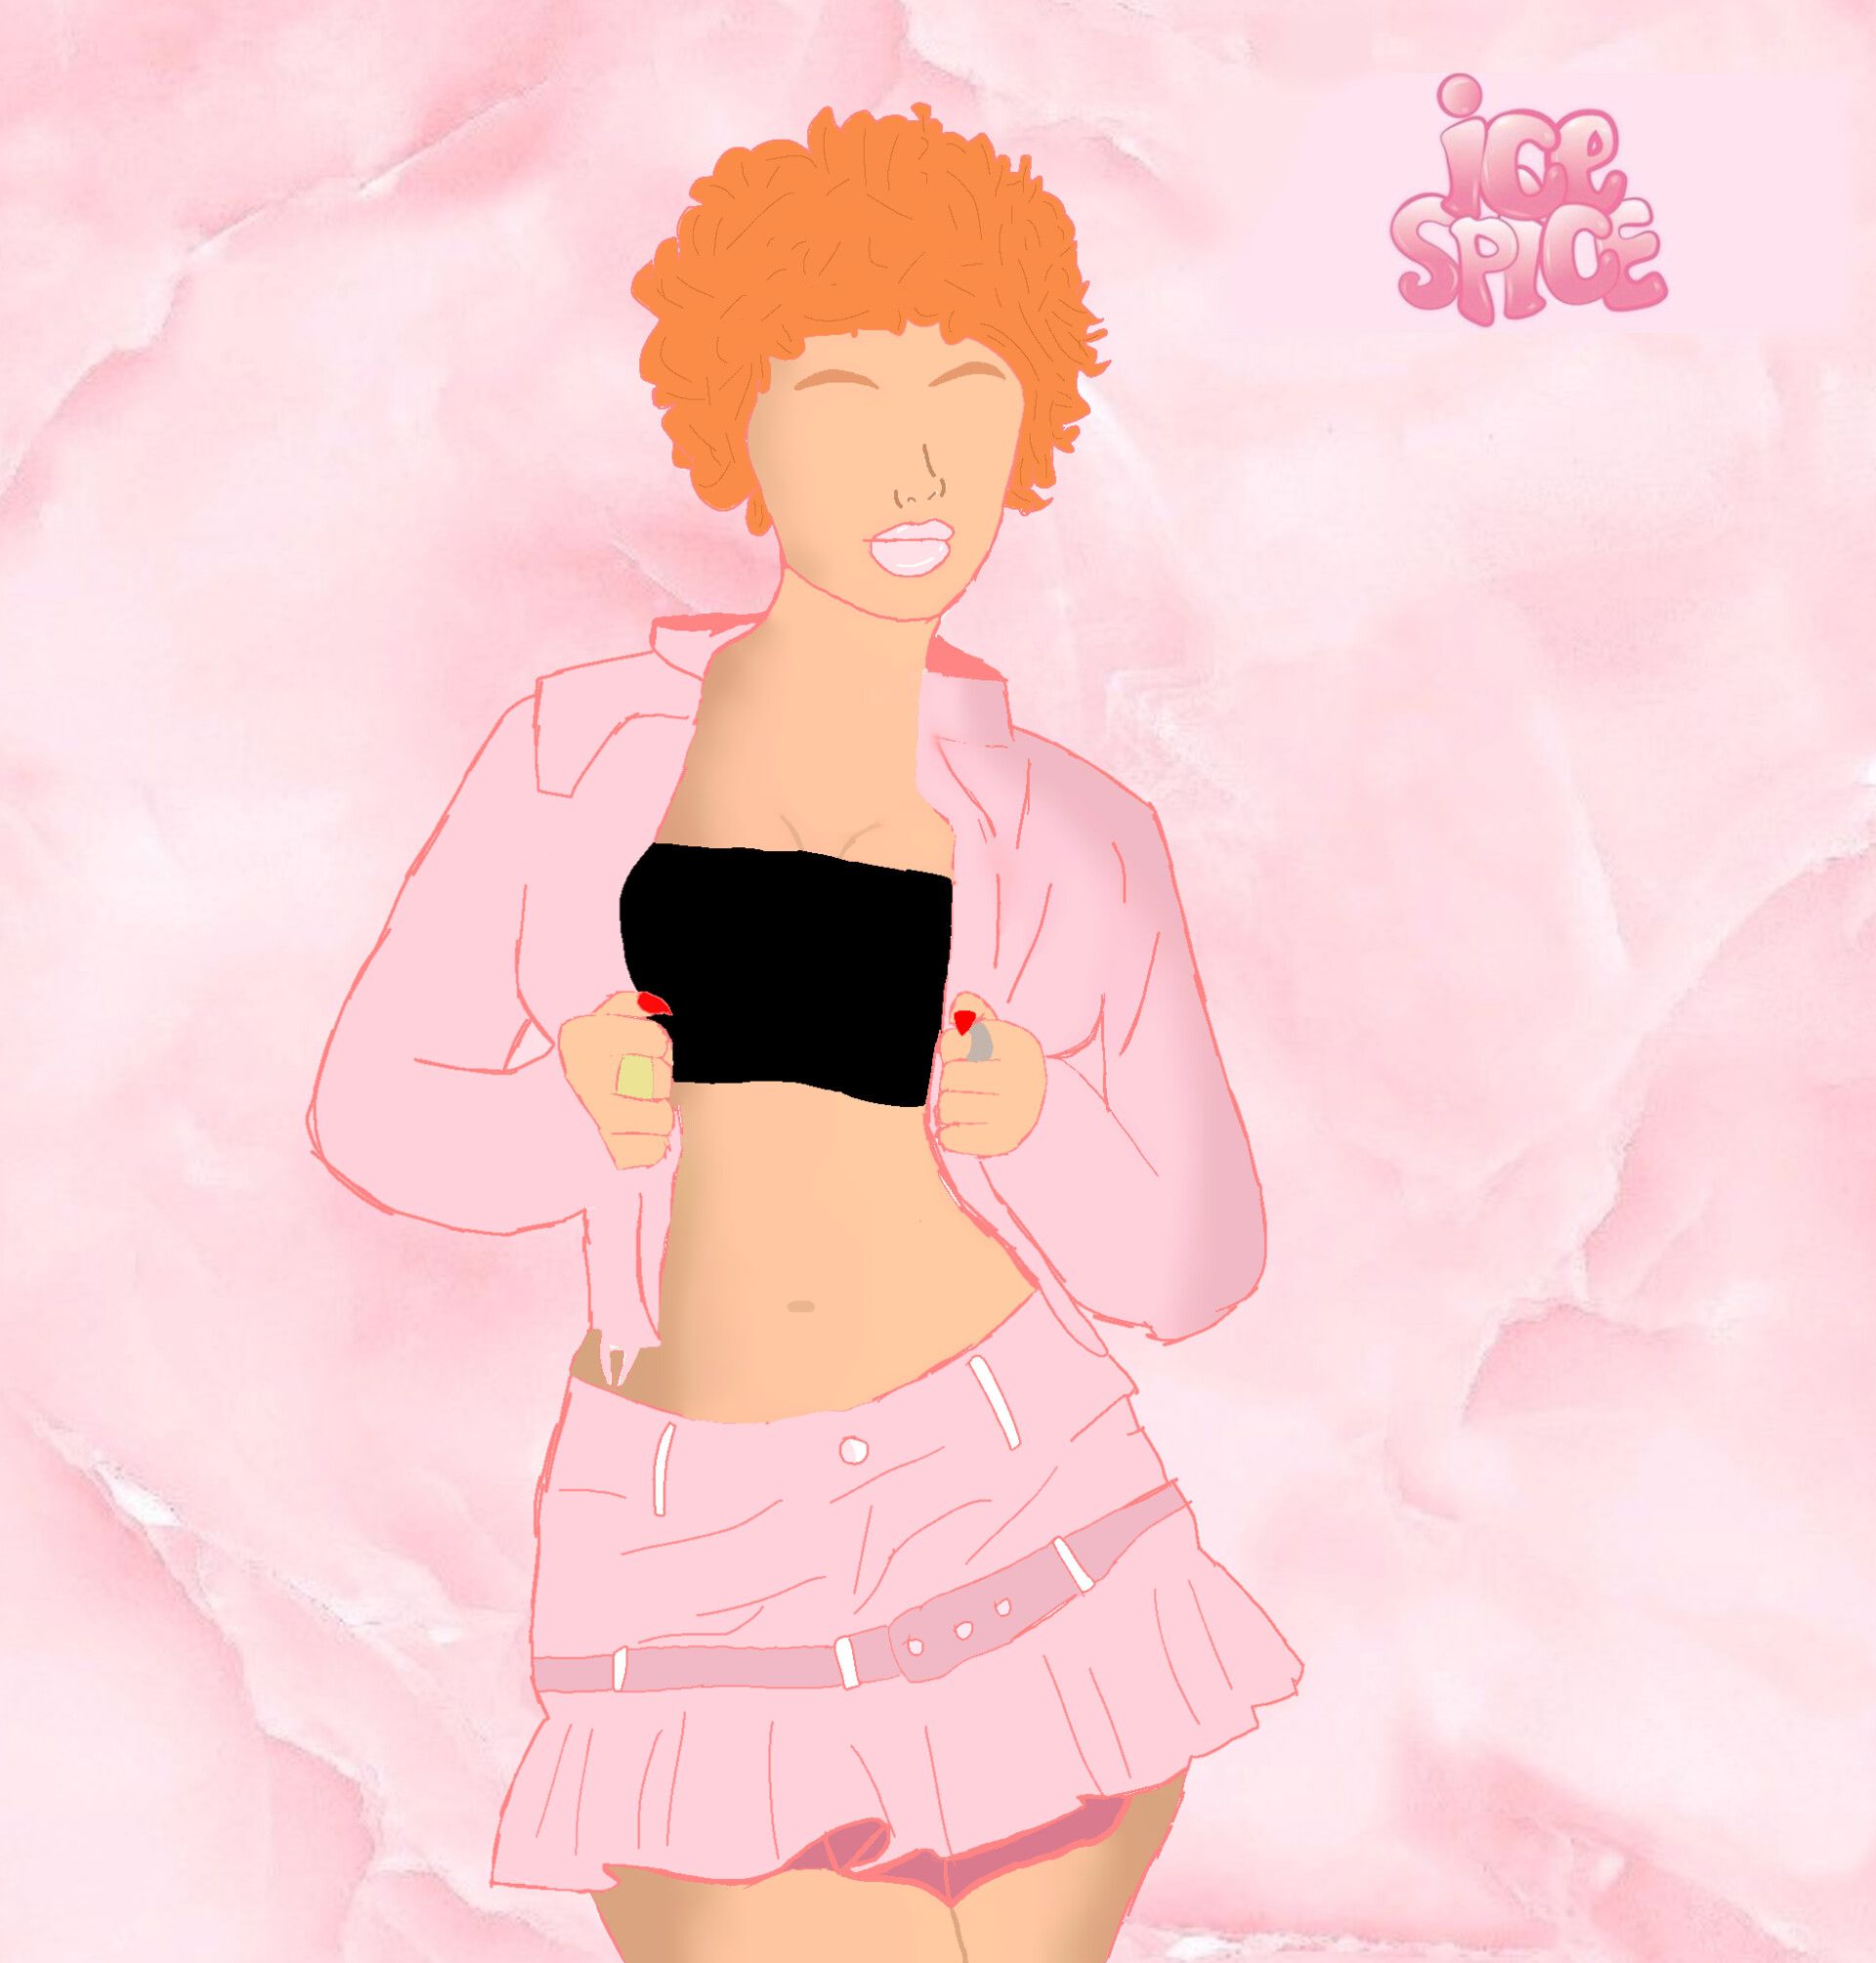 A digital illustration of a woman with orange hair and pink clothes. - Ice Spice